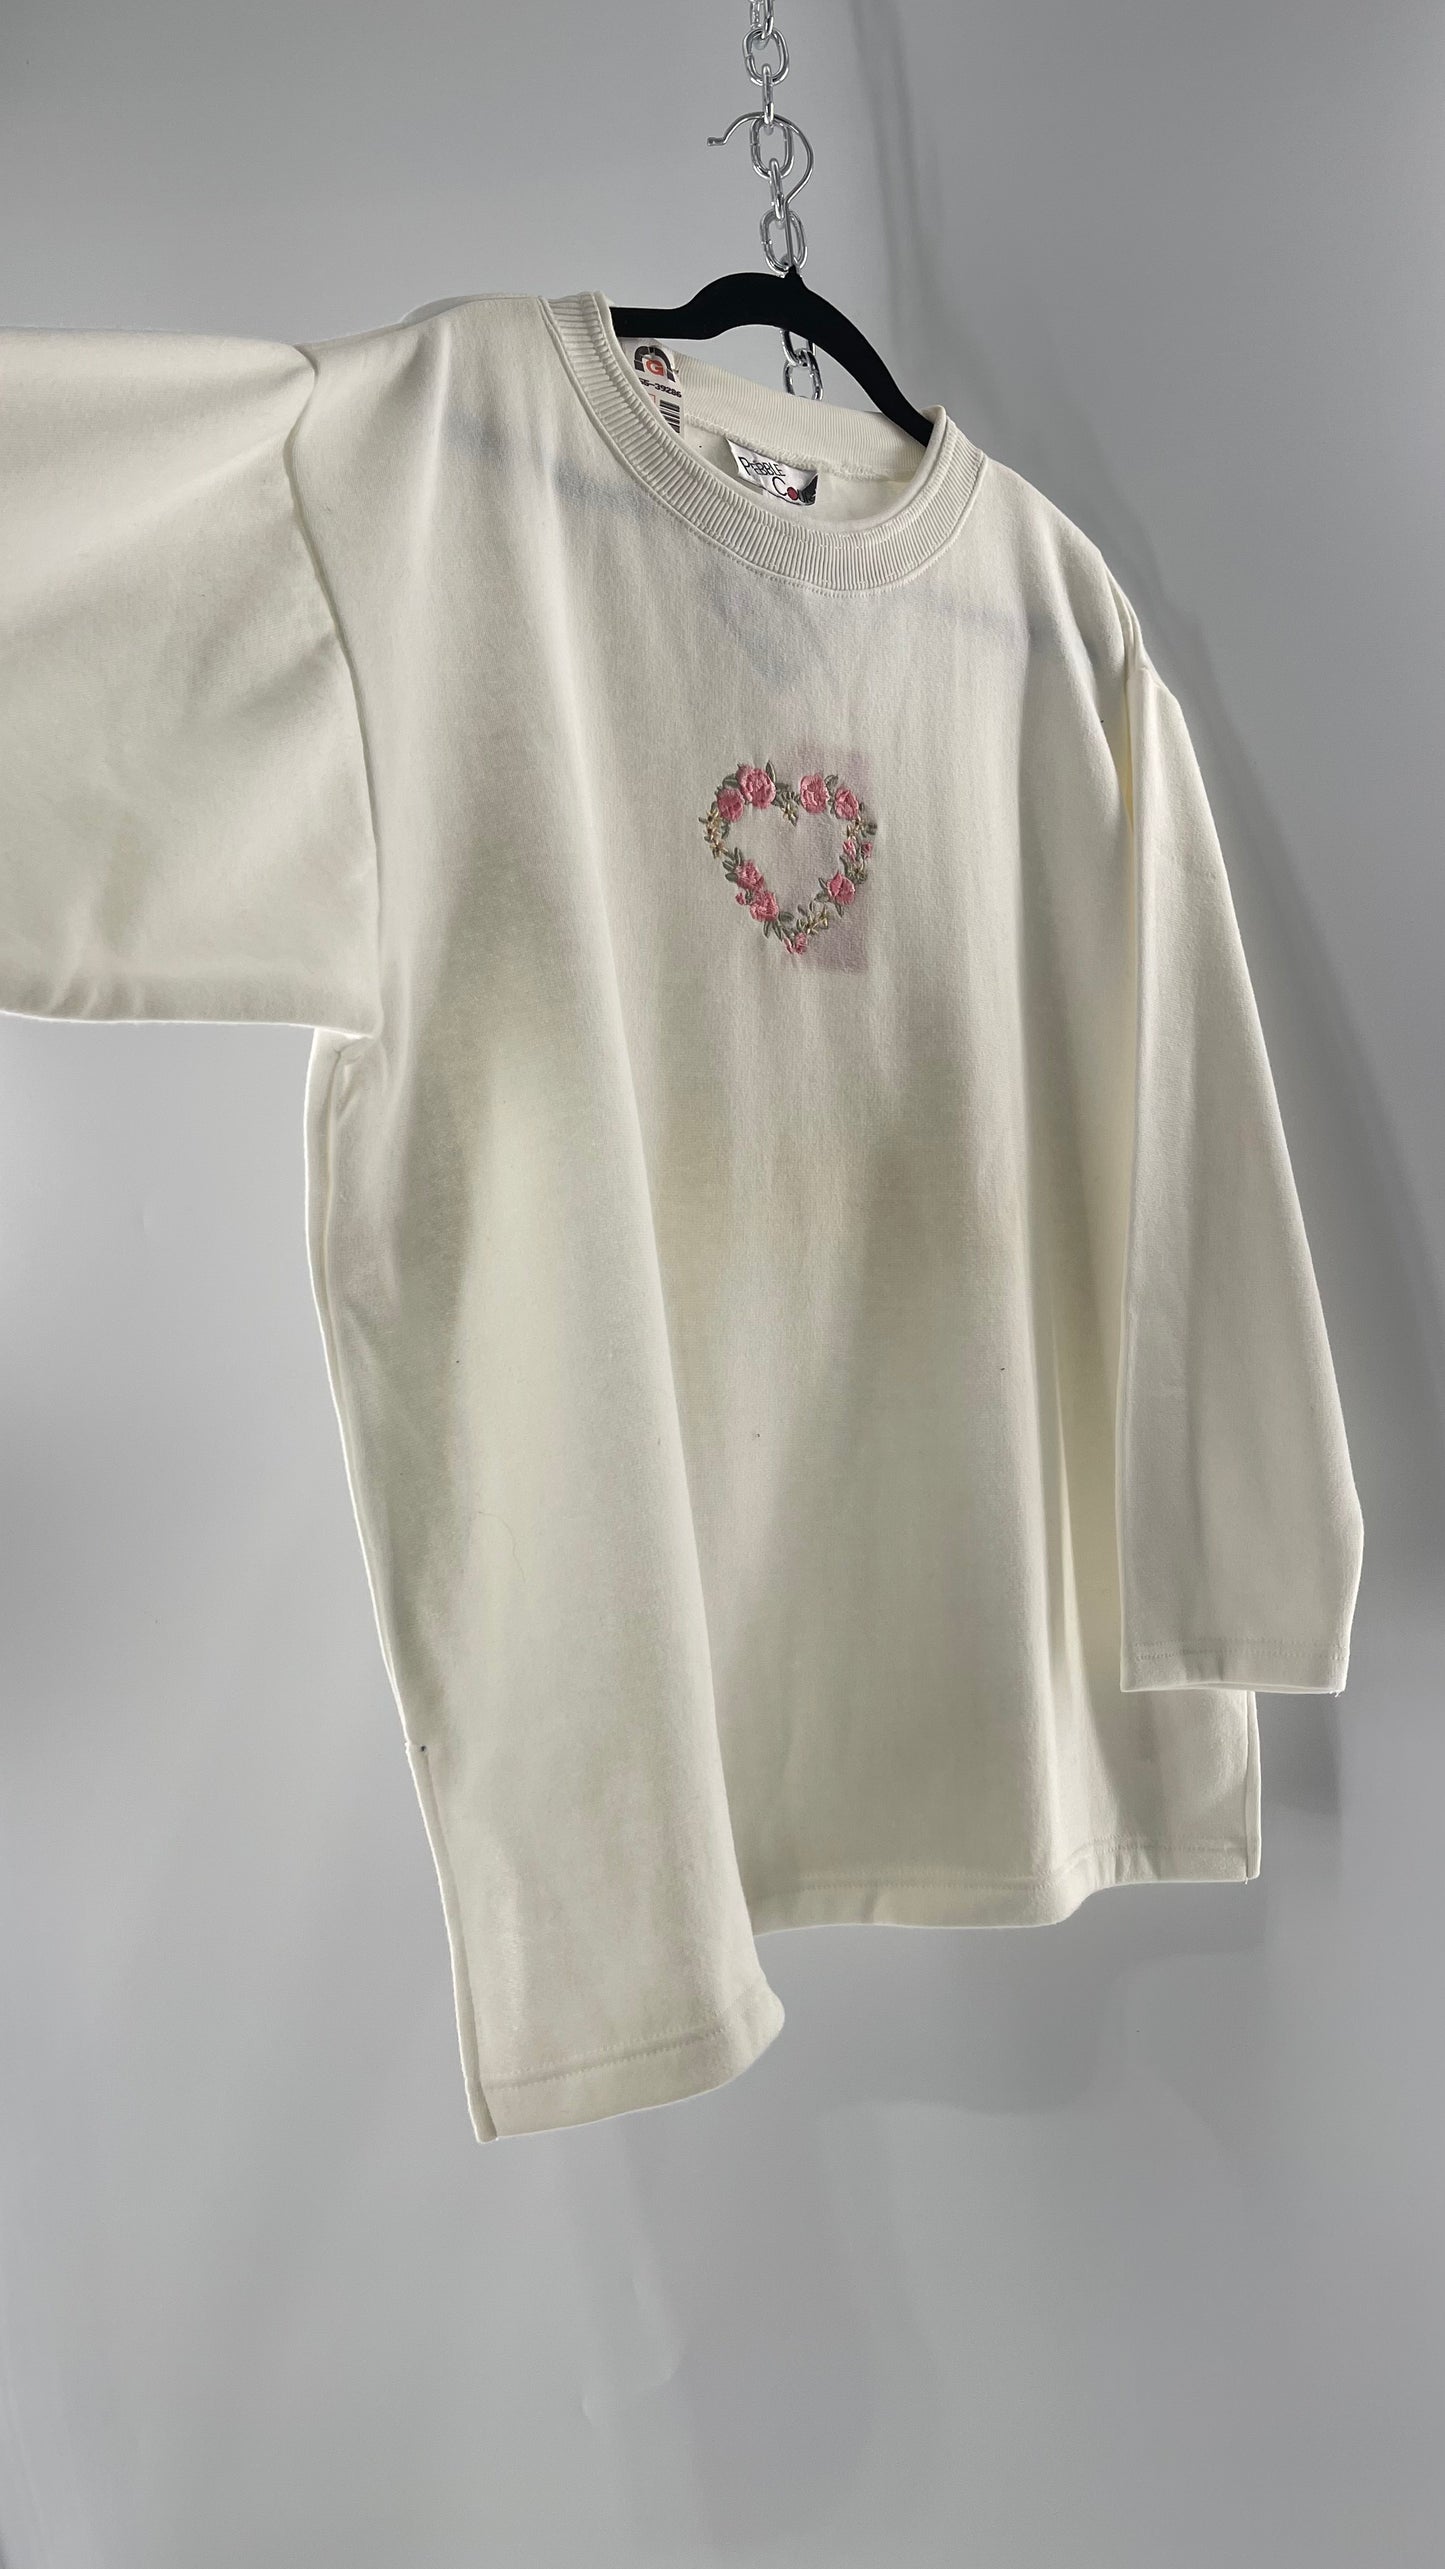 Deadstock 1990s Vintage Pebble Court Pink Rose Embroidered Heart Ivory Crewneck  (Large)